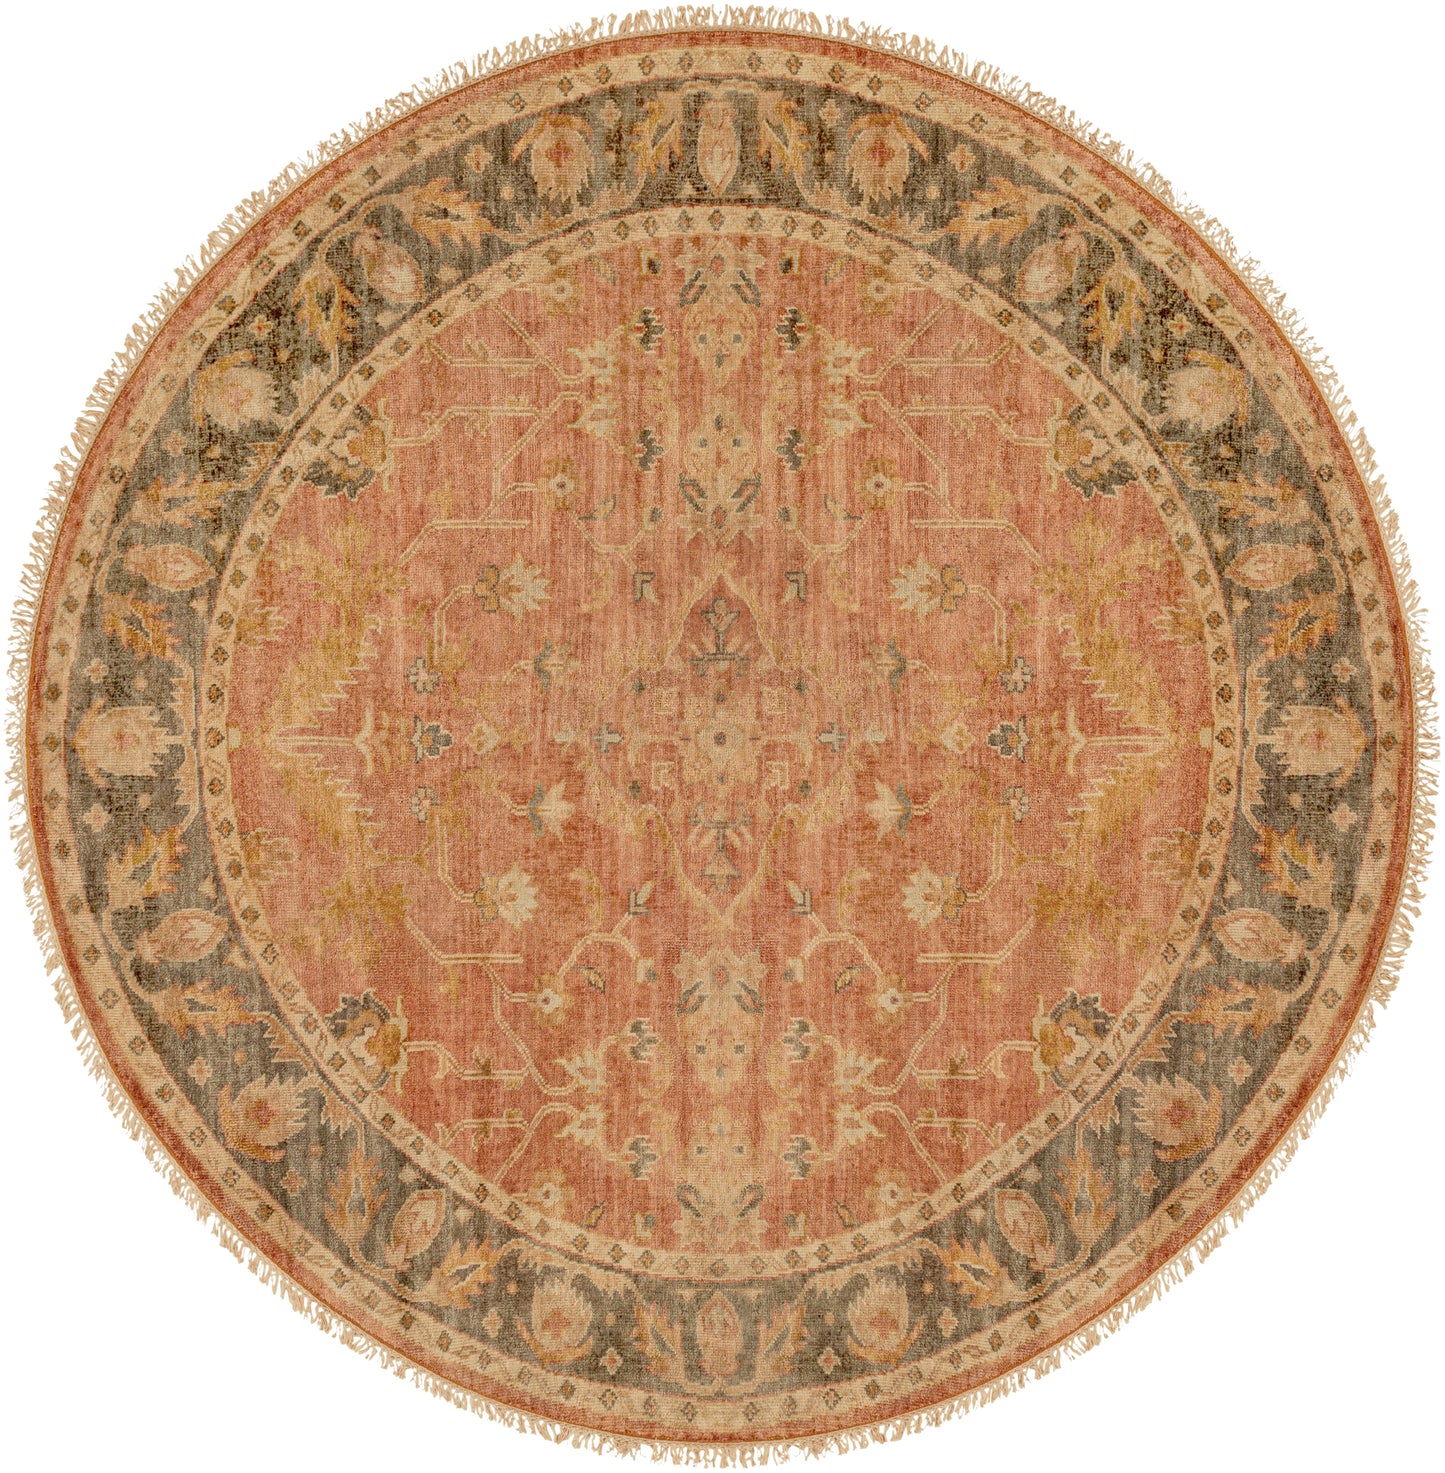 Hillcrest 1699 Hand Knotted Wool Indoor Area Rug by Surya Rugs